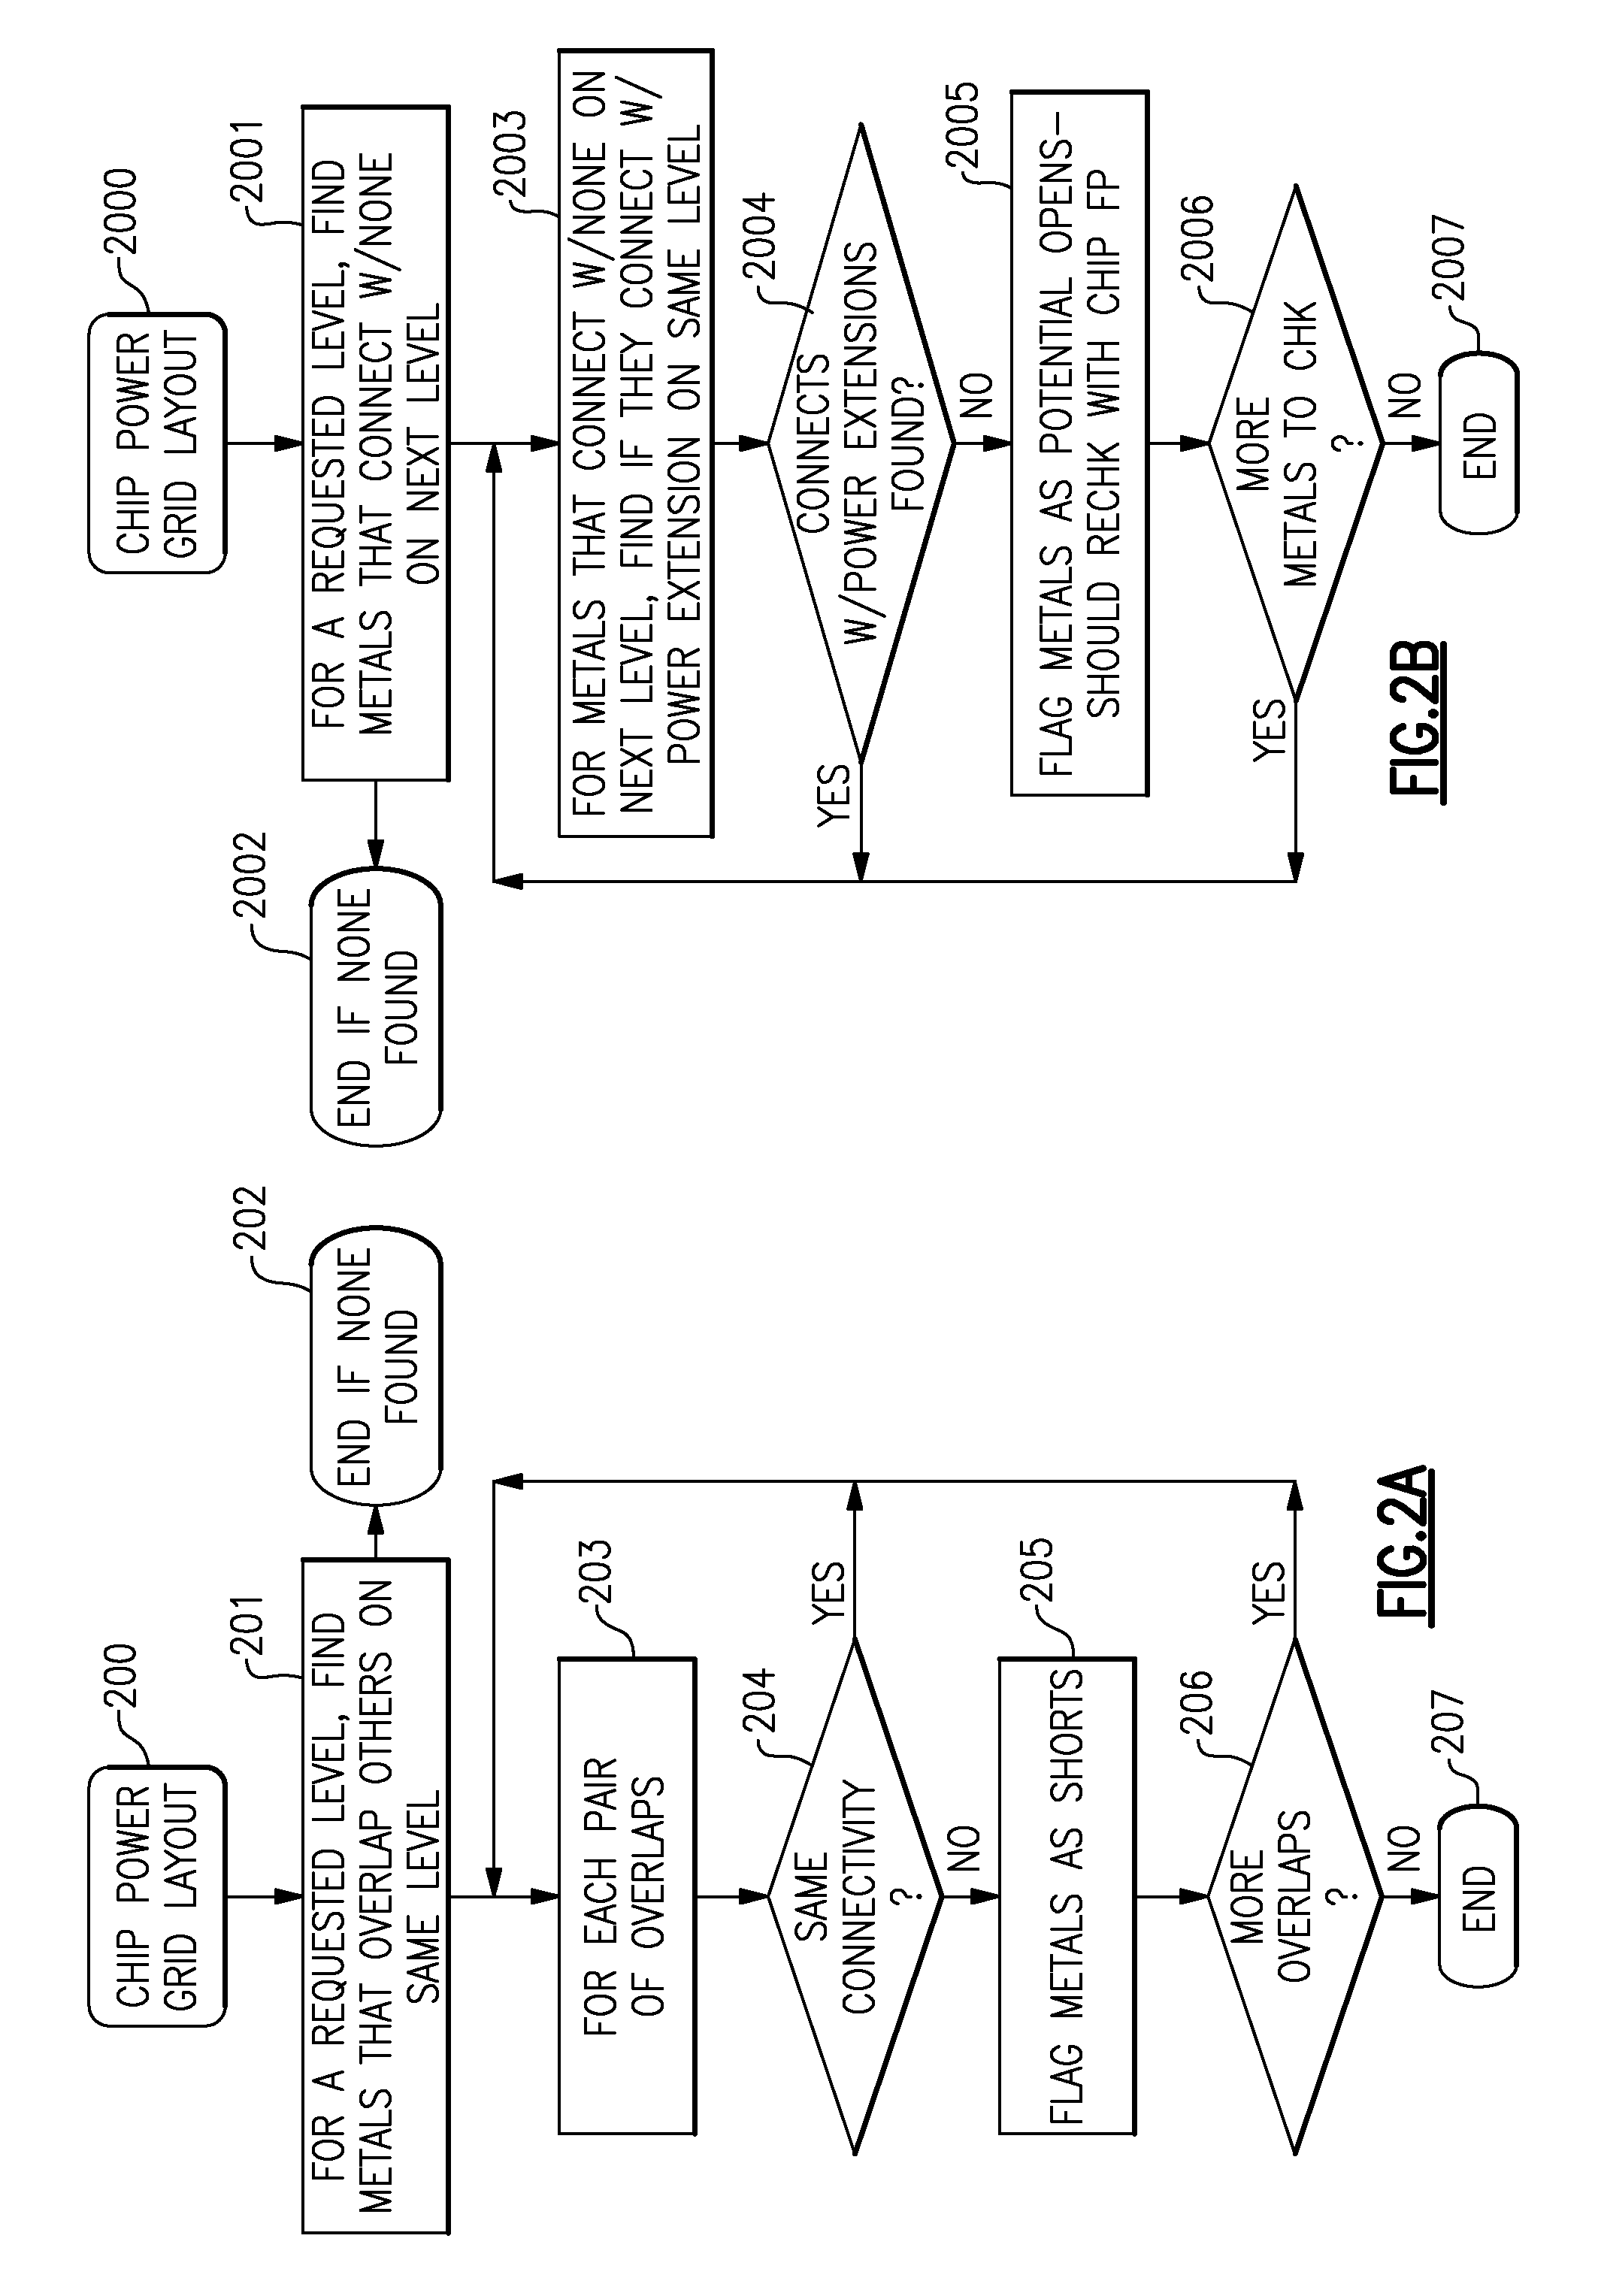 Automated method and apparatus for very early validation of chip power distribution networks in semiconductor chip designs